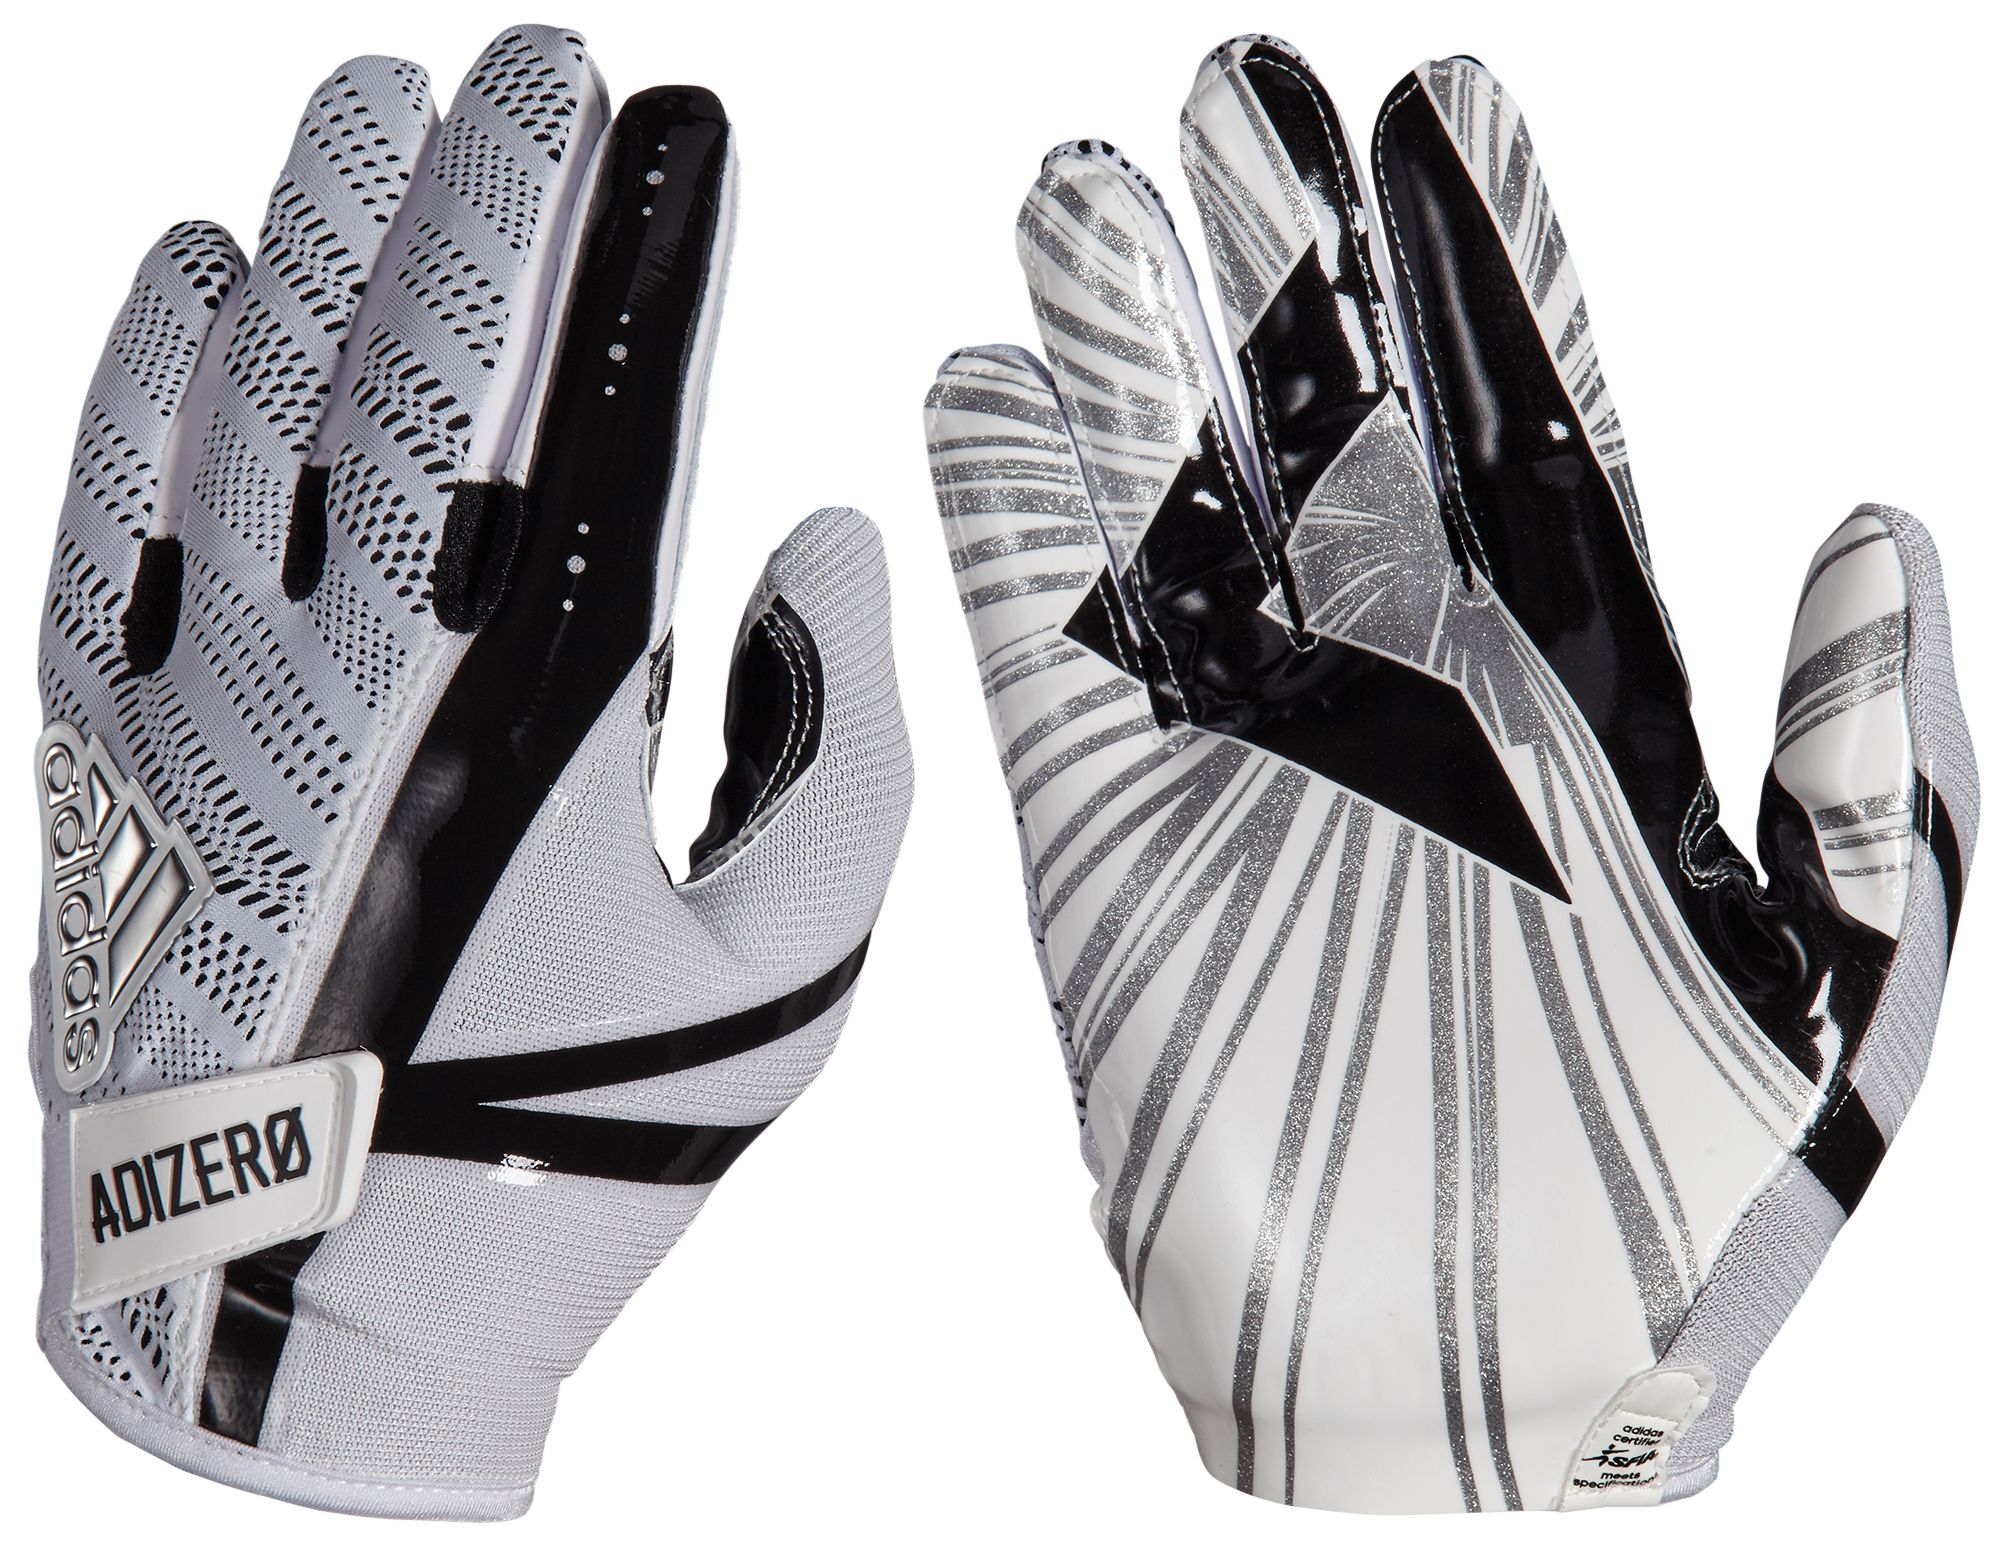 adidas Football Gloves | DICK'S Sporting Goods